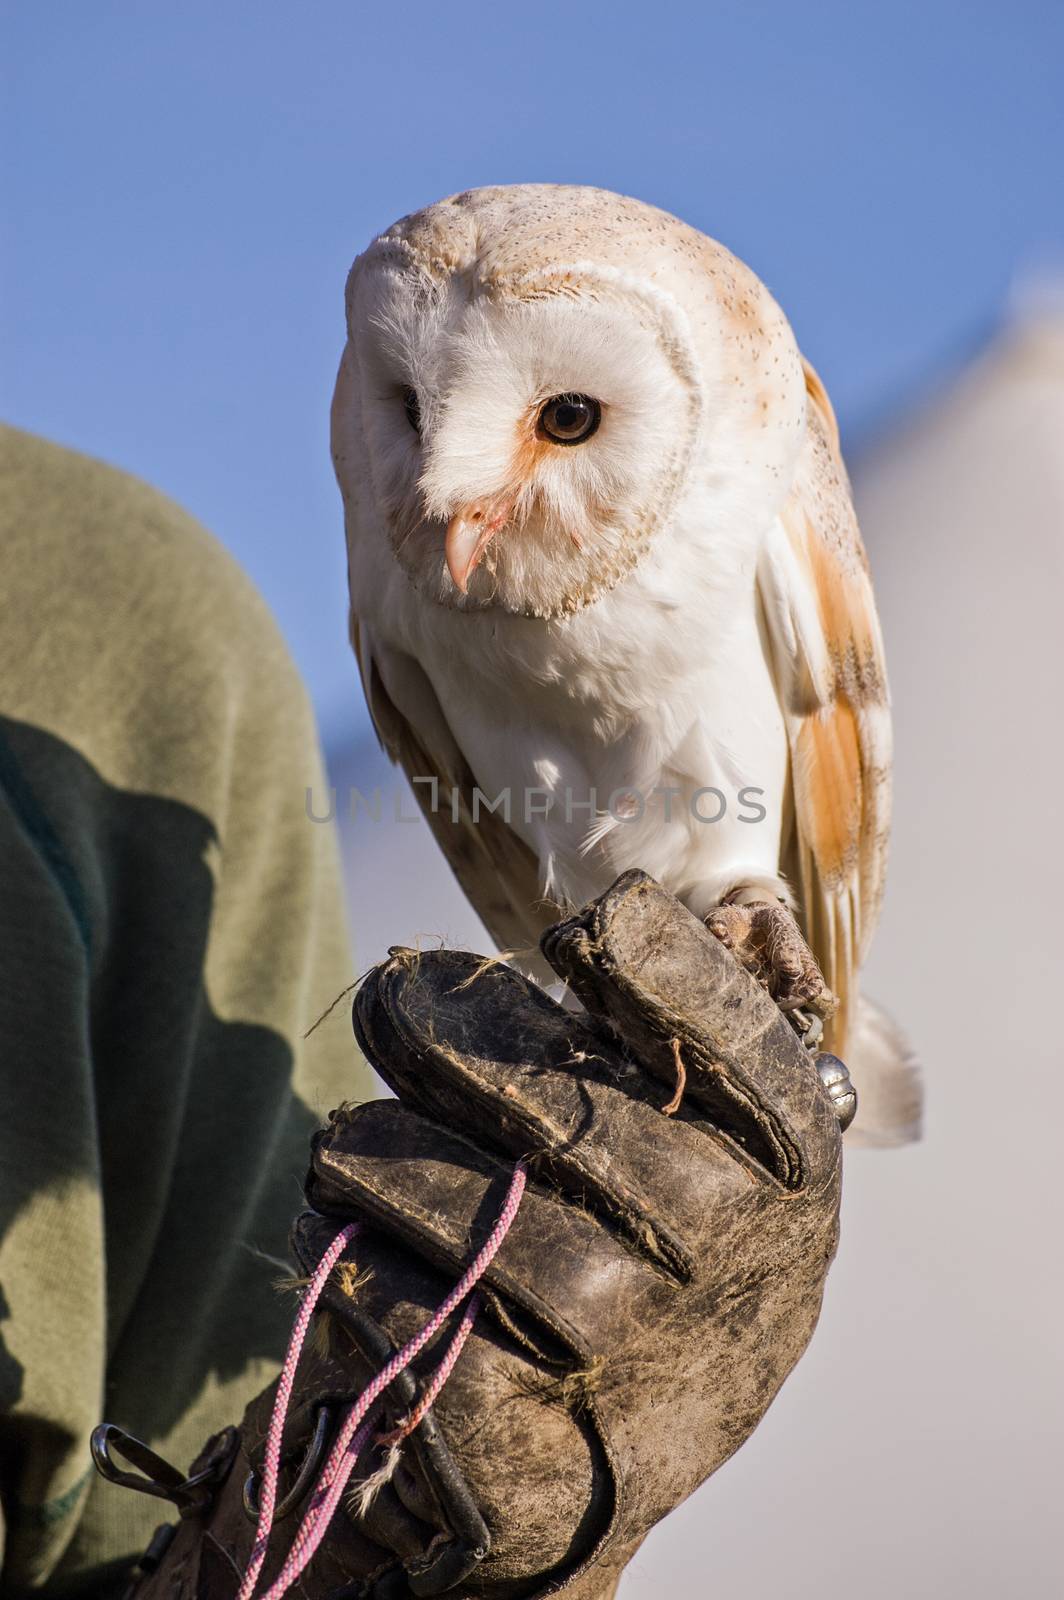 Trained Barn Owl on Gauntlet by BasPhoto